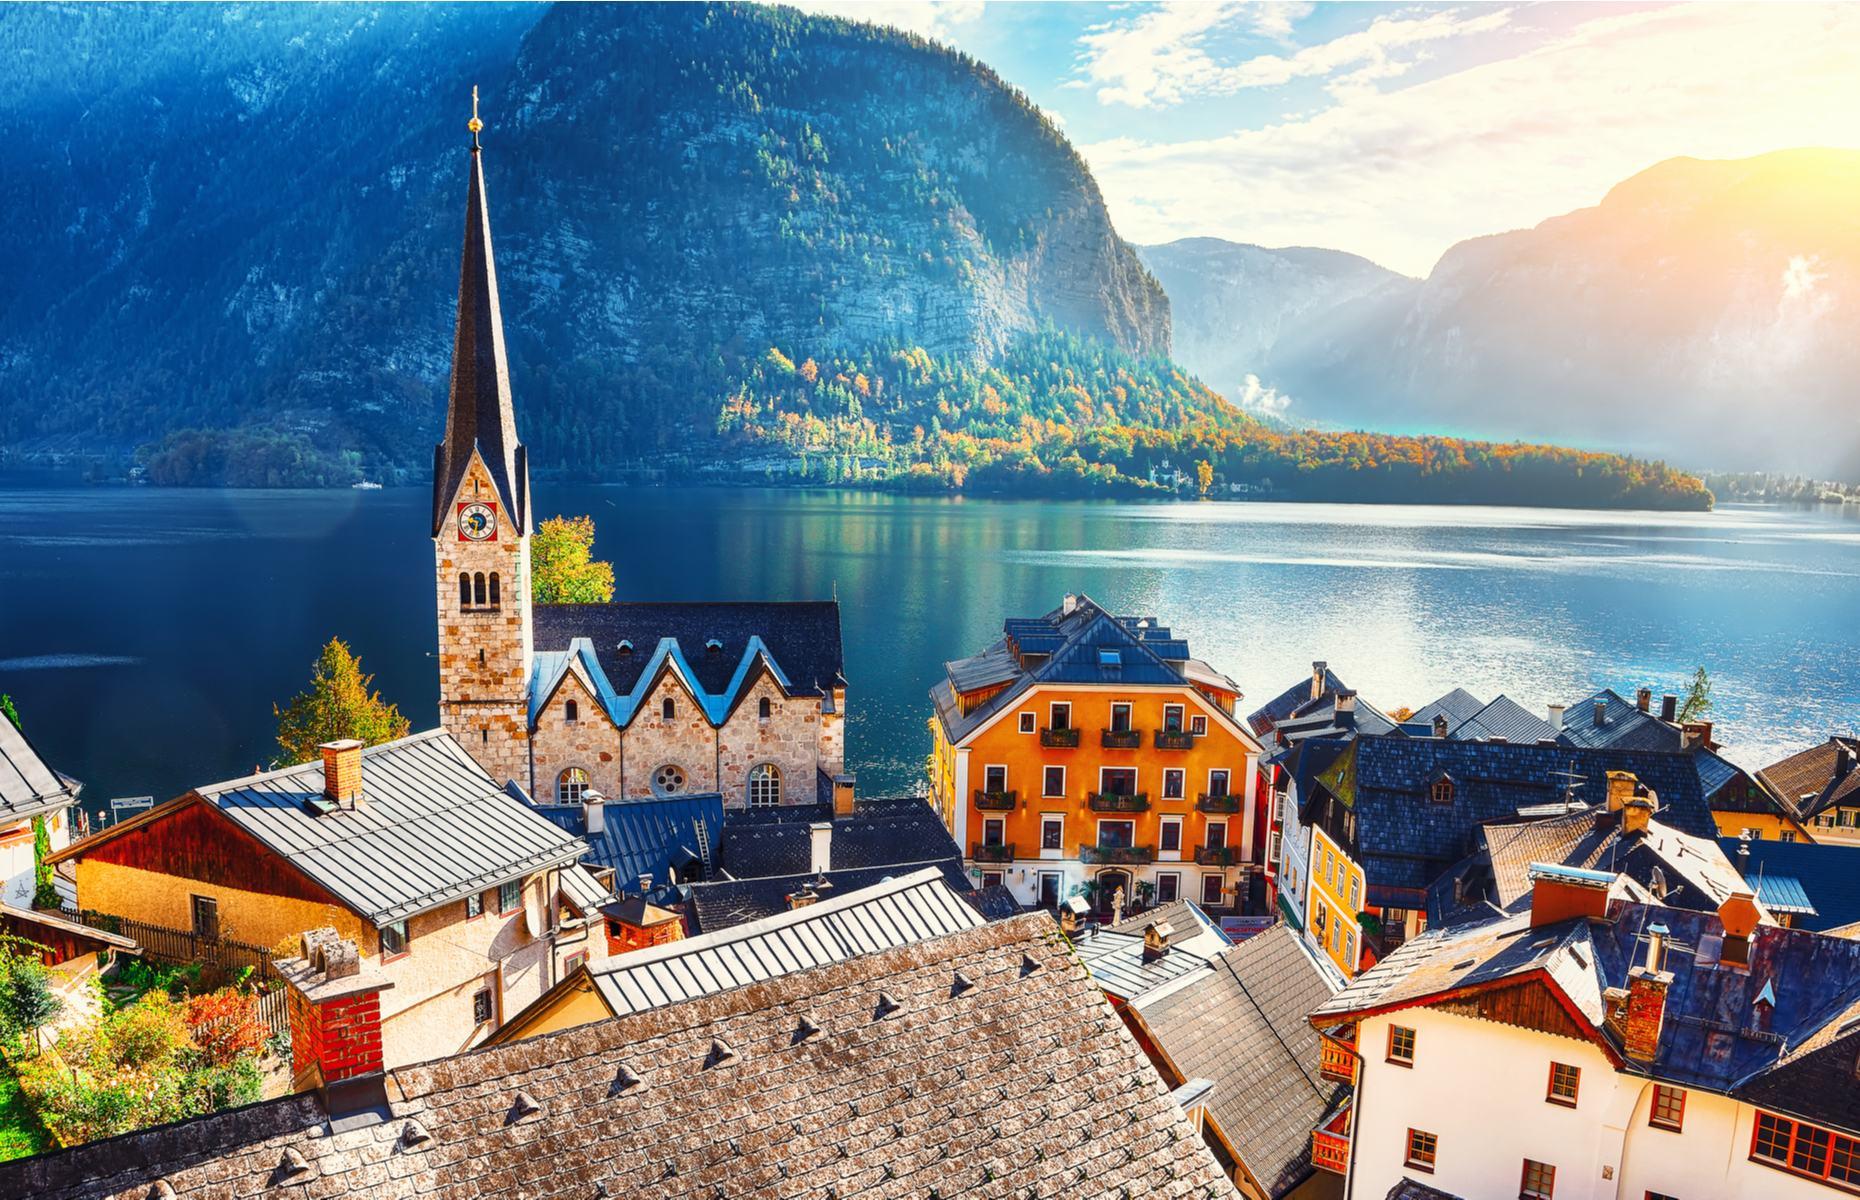 <p>Although an 18th-century fire destroyed many of the medieval wooden buildings here, Hallstatt still retains much of its original beauty. Located in Upper Austria, the town grew wealthy from its trade in salt since prehistoric times, and its relative isolation means it has kept its picture-postcard appearance. Mountain-fringed Hallstatt is also said to be the inspiration for Arendelle in the Disney franchise <em>Frozen</em>.</p>